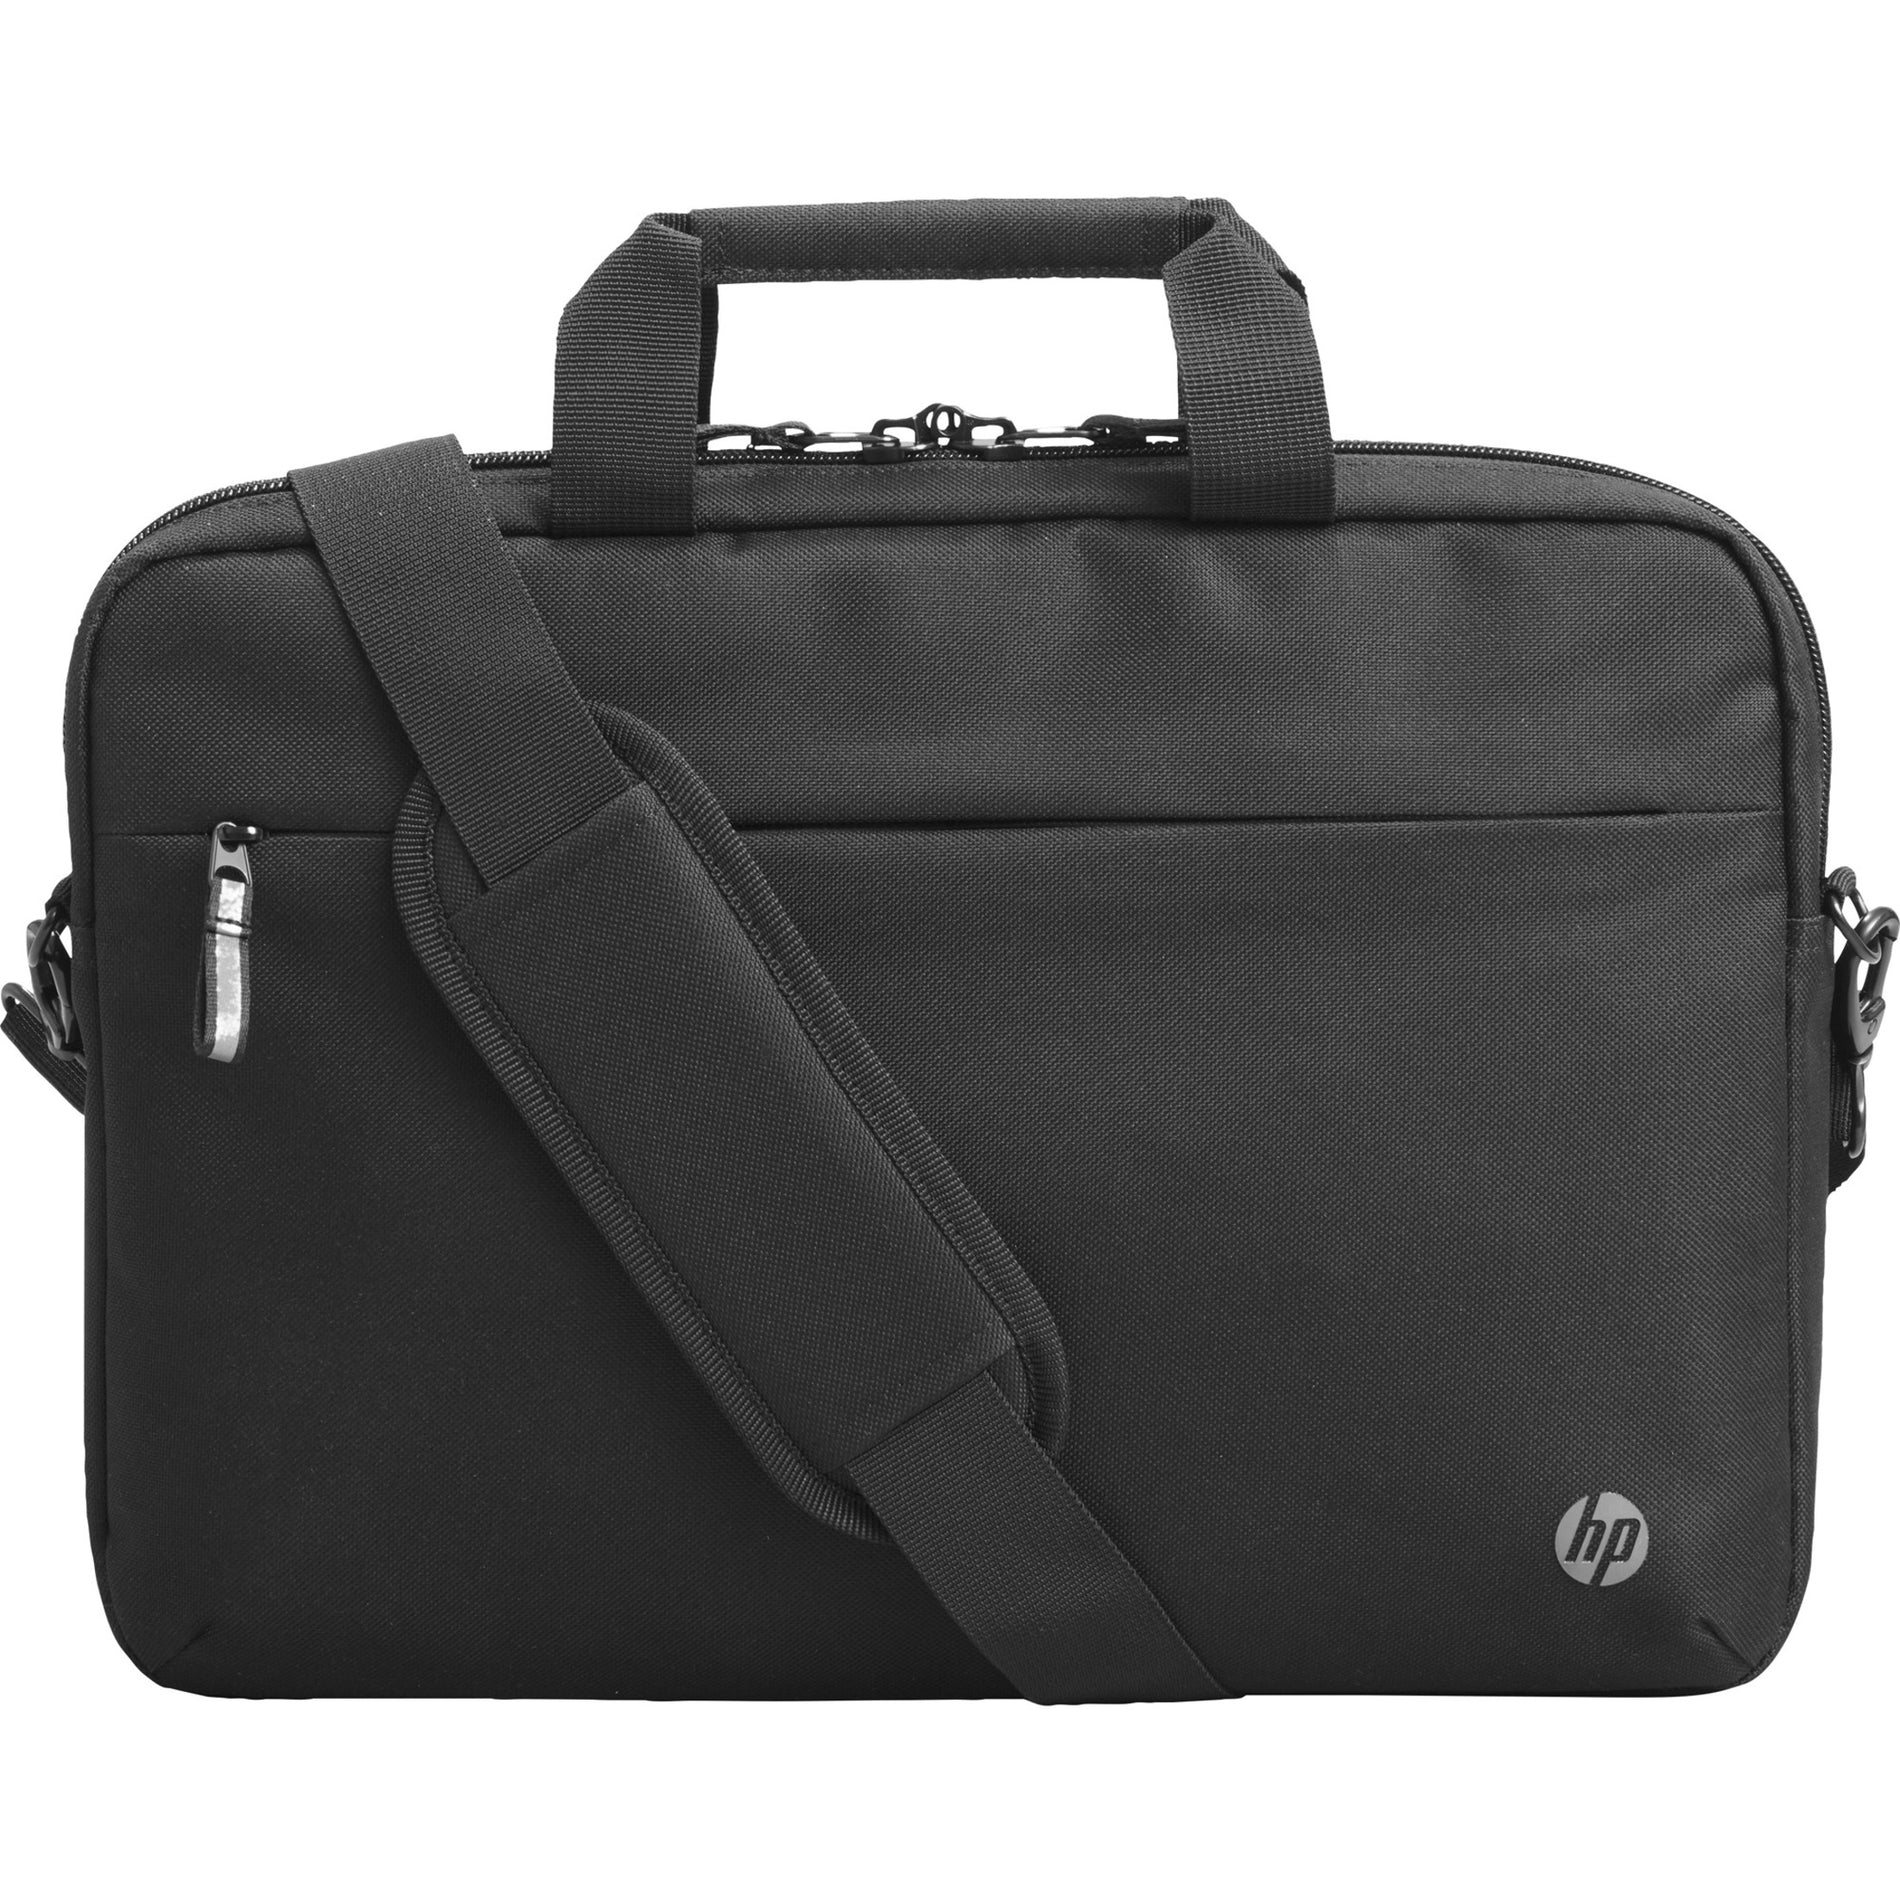 HP 3E2U6AA Renew Business 17.3 Laptop Bag, Compatible with Elite Dragonfly G2, 470 G8, Accessories, Notebook